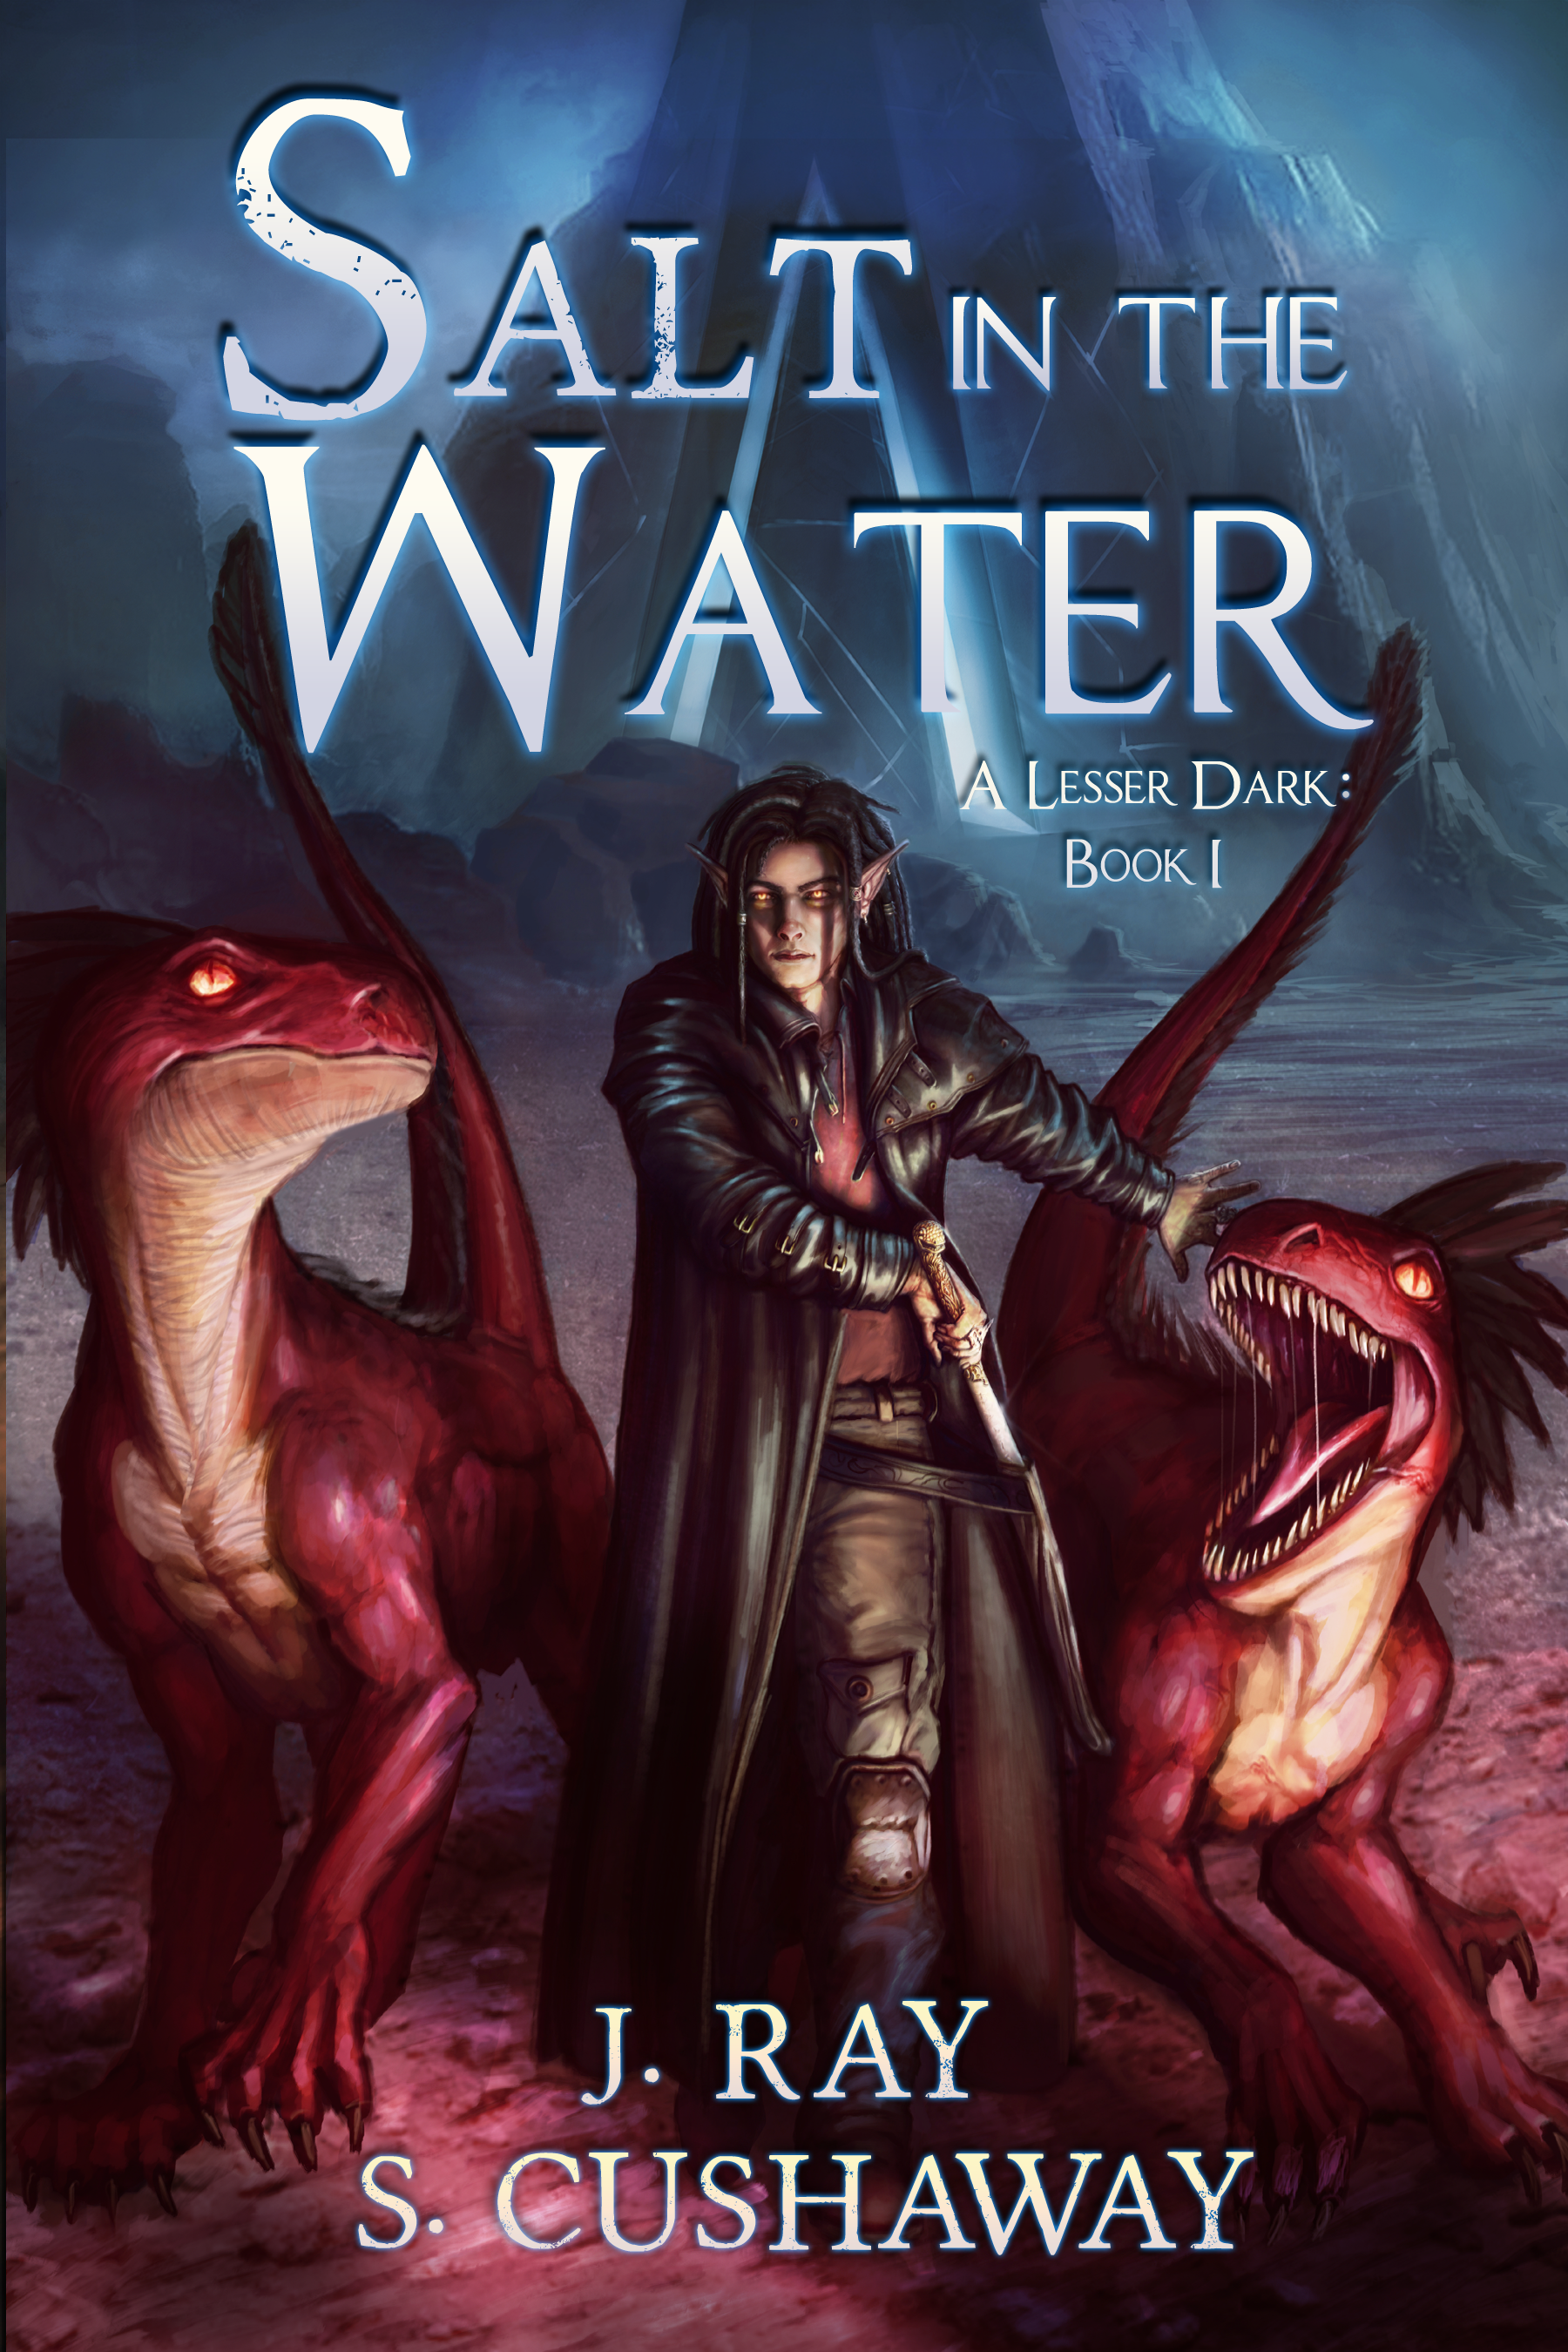 Book Review: Salt in the Water by J. Ray and S. Cushaway